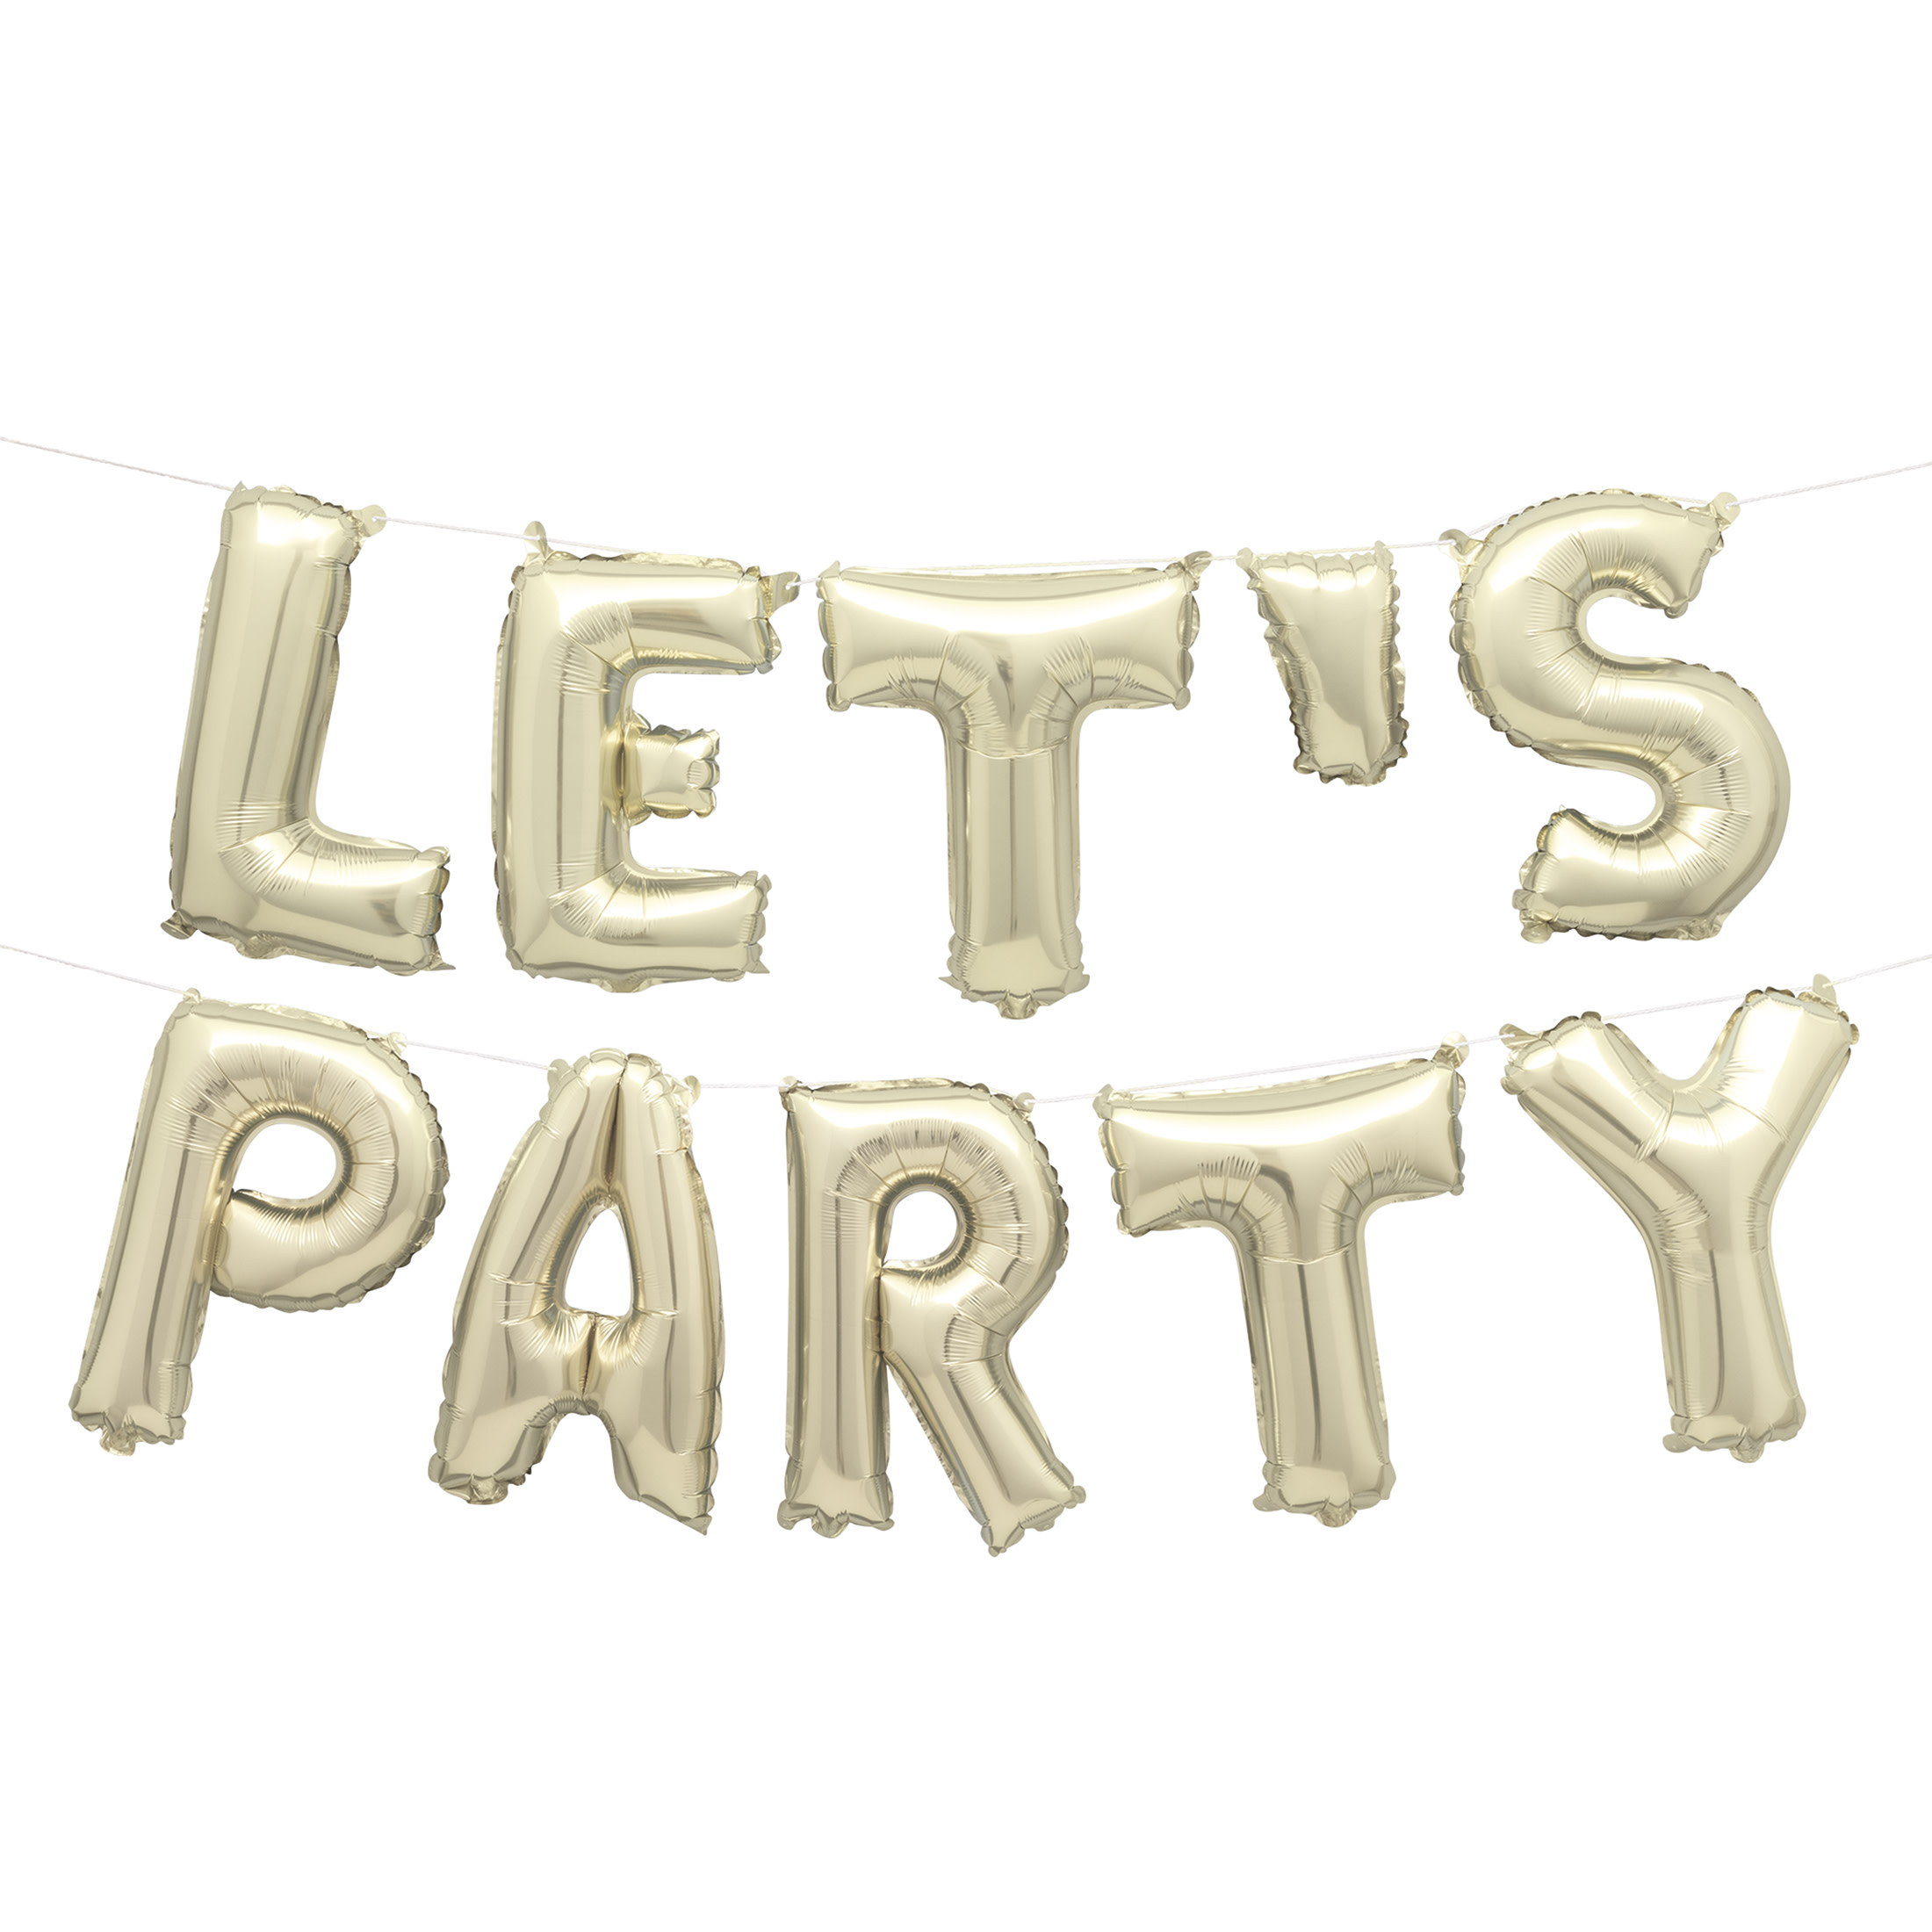 'Let's Party' Gold Word Balloon Banner Kit